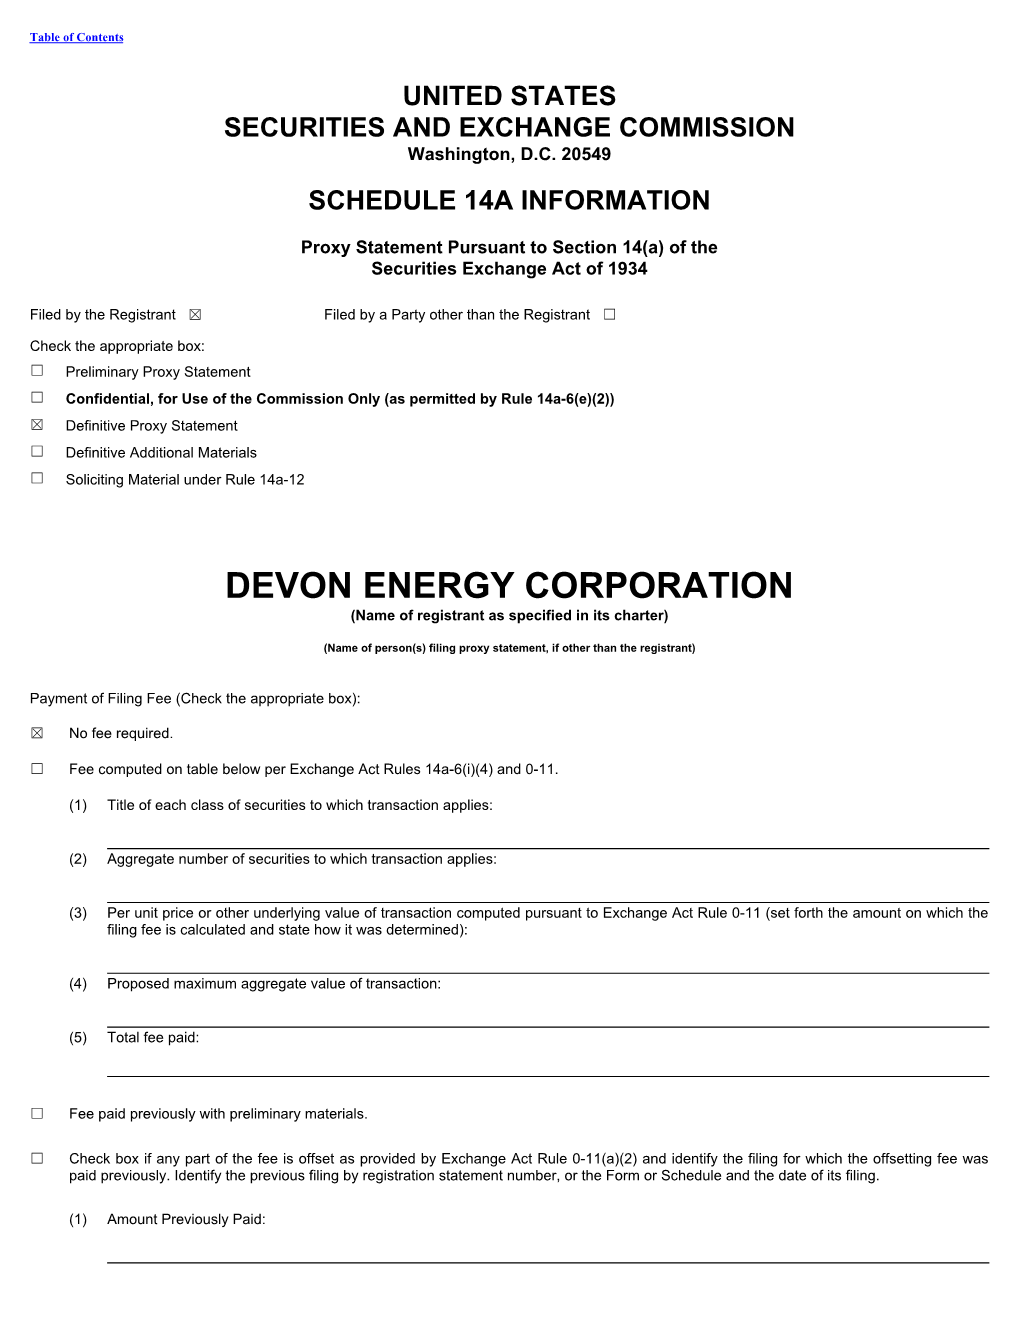 DEVON ENERGY CORPORATION (Name of Registrant As Specified in Its Charter)